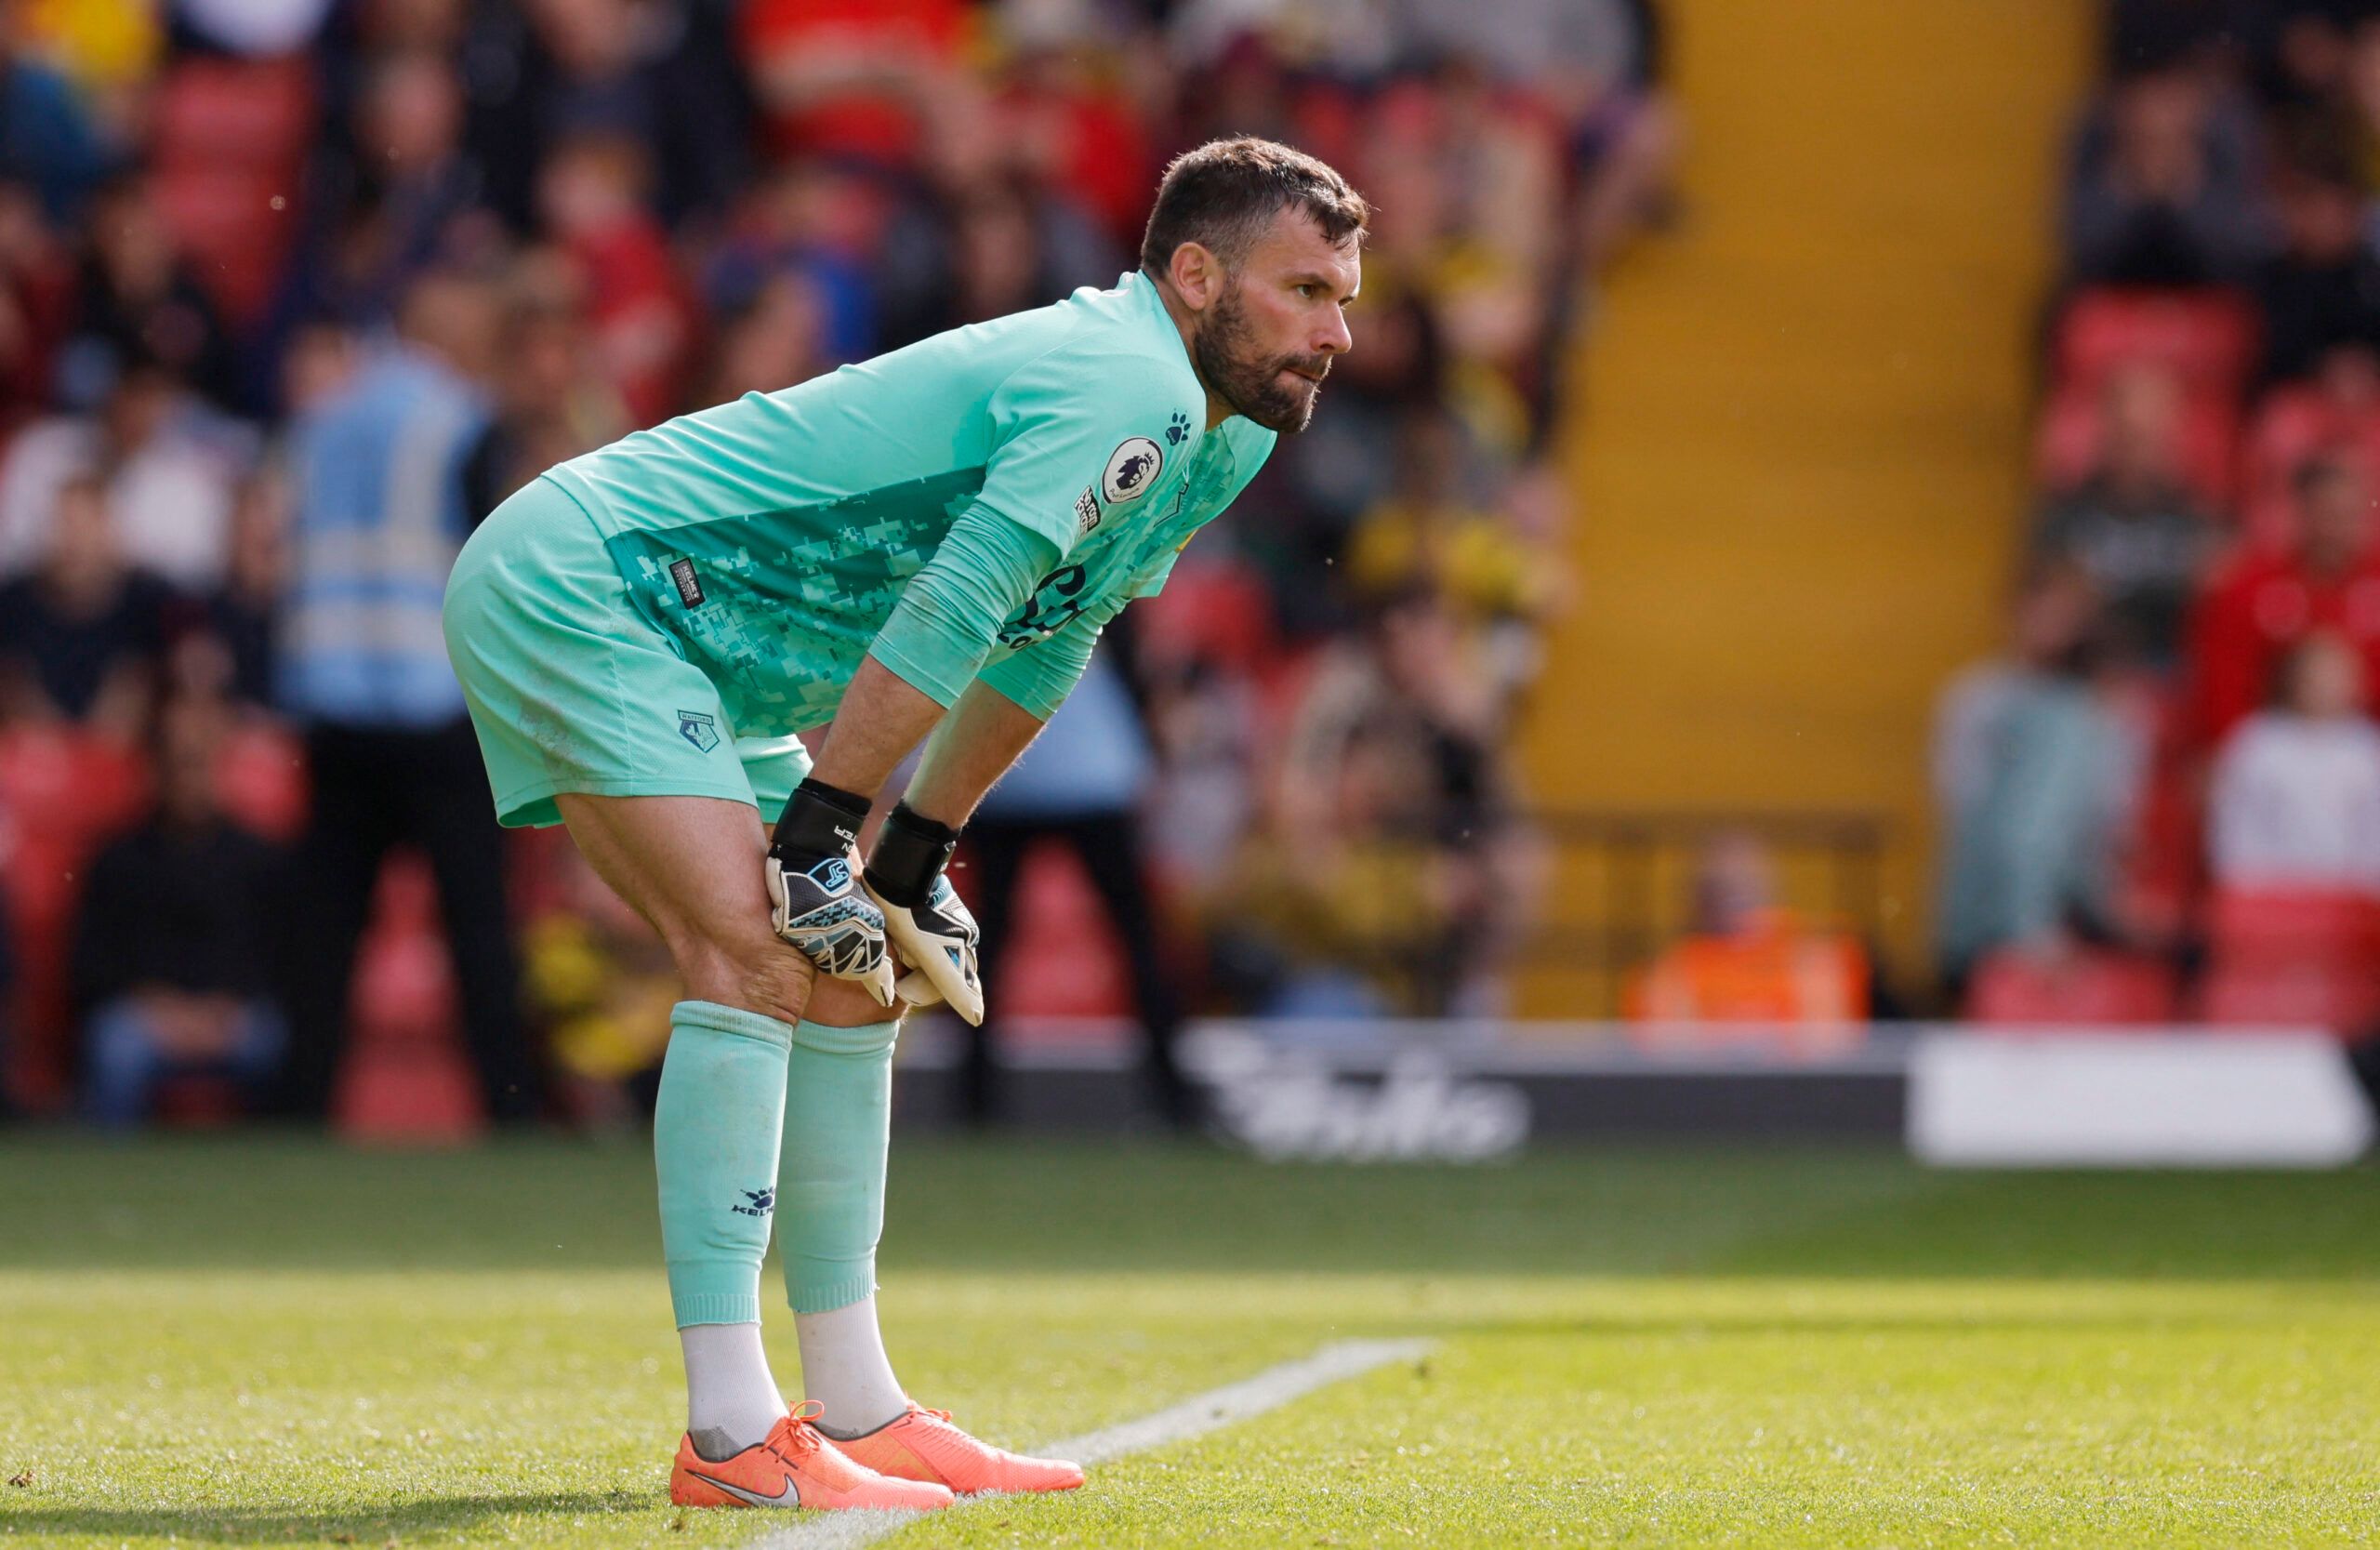 Soccer Football - Premier League - Watford v Burnley - Vicarage Road, Watford, Britain - April 30, 2022 Watford's Ben Foster looks dejected after conceding their second goal Action Images via Reuters/Andrew Couldridge EDITORIAL USE ONLY. No use with unauthorized audio, video, data, fixture lists, club/league logos or 'live' services. Online in-match use limited to 75 images, no video emulation. No use in betting, games or single club /league/player publications.  Please contact your account repr